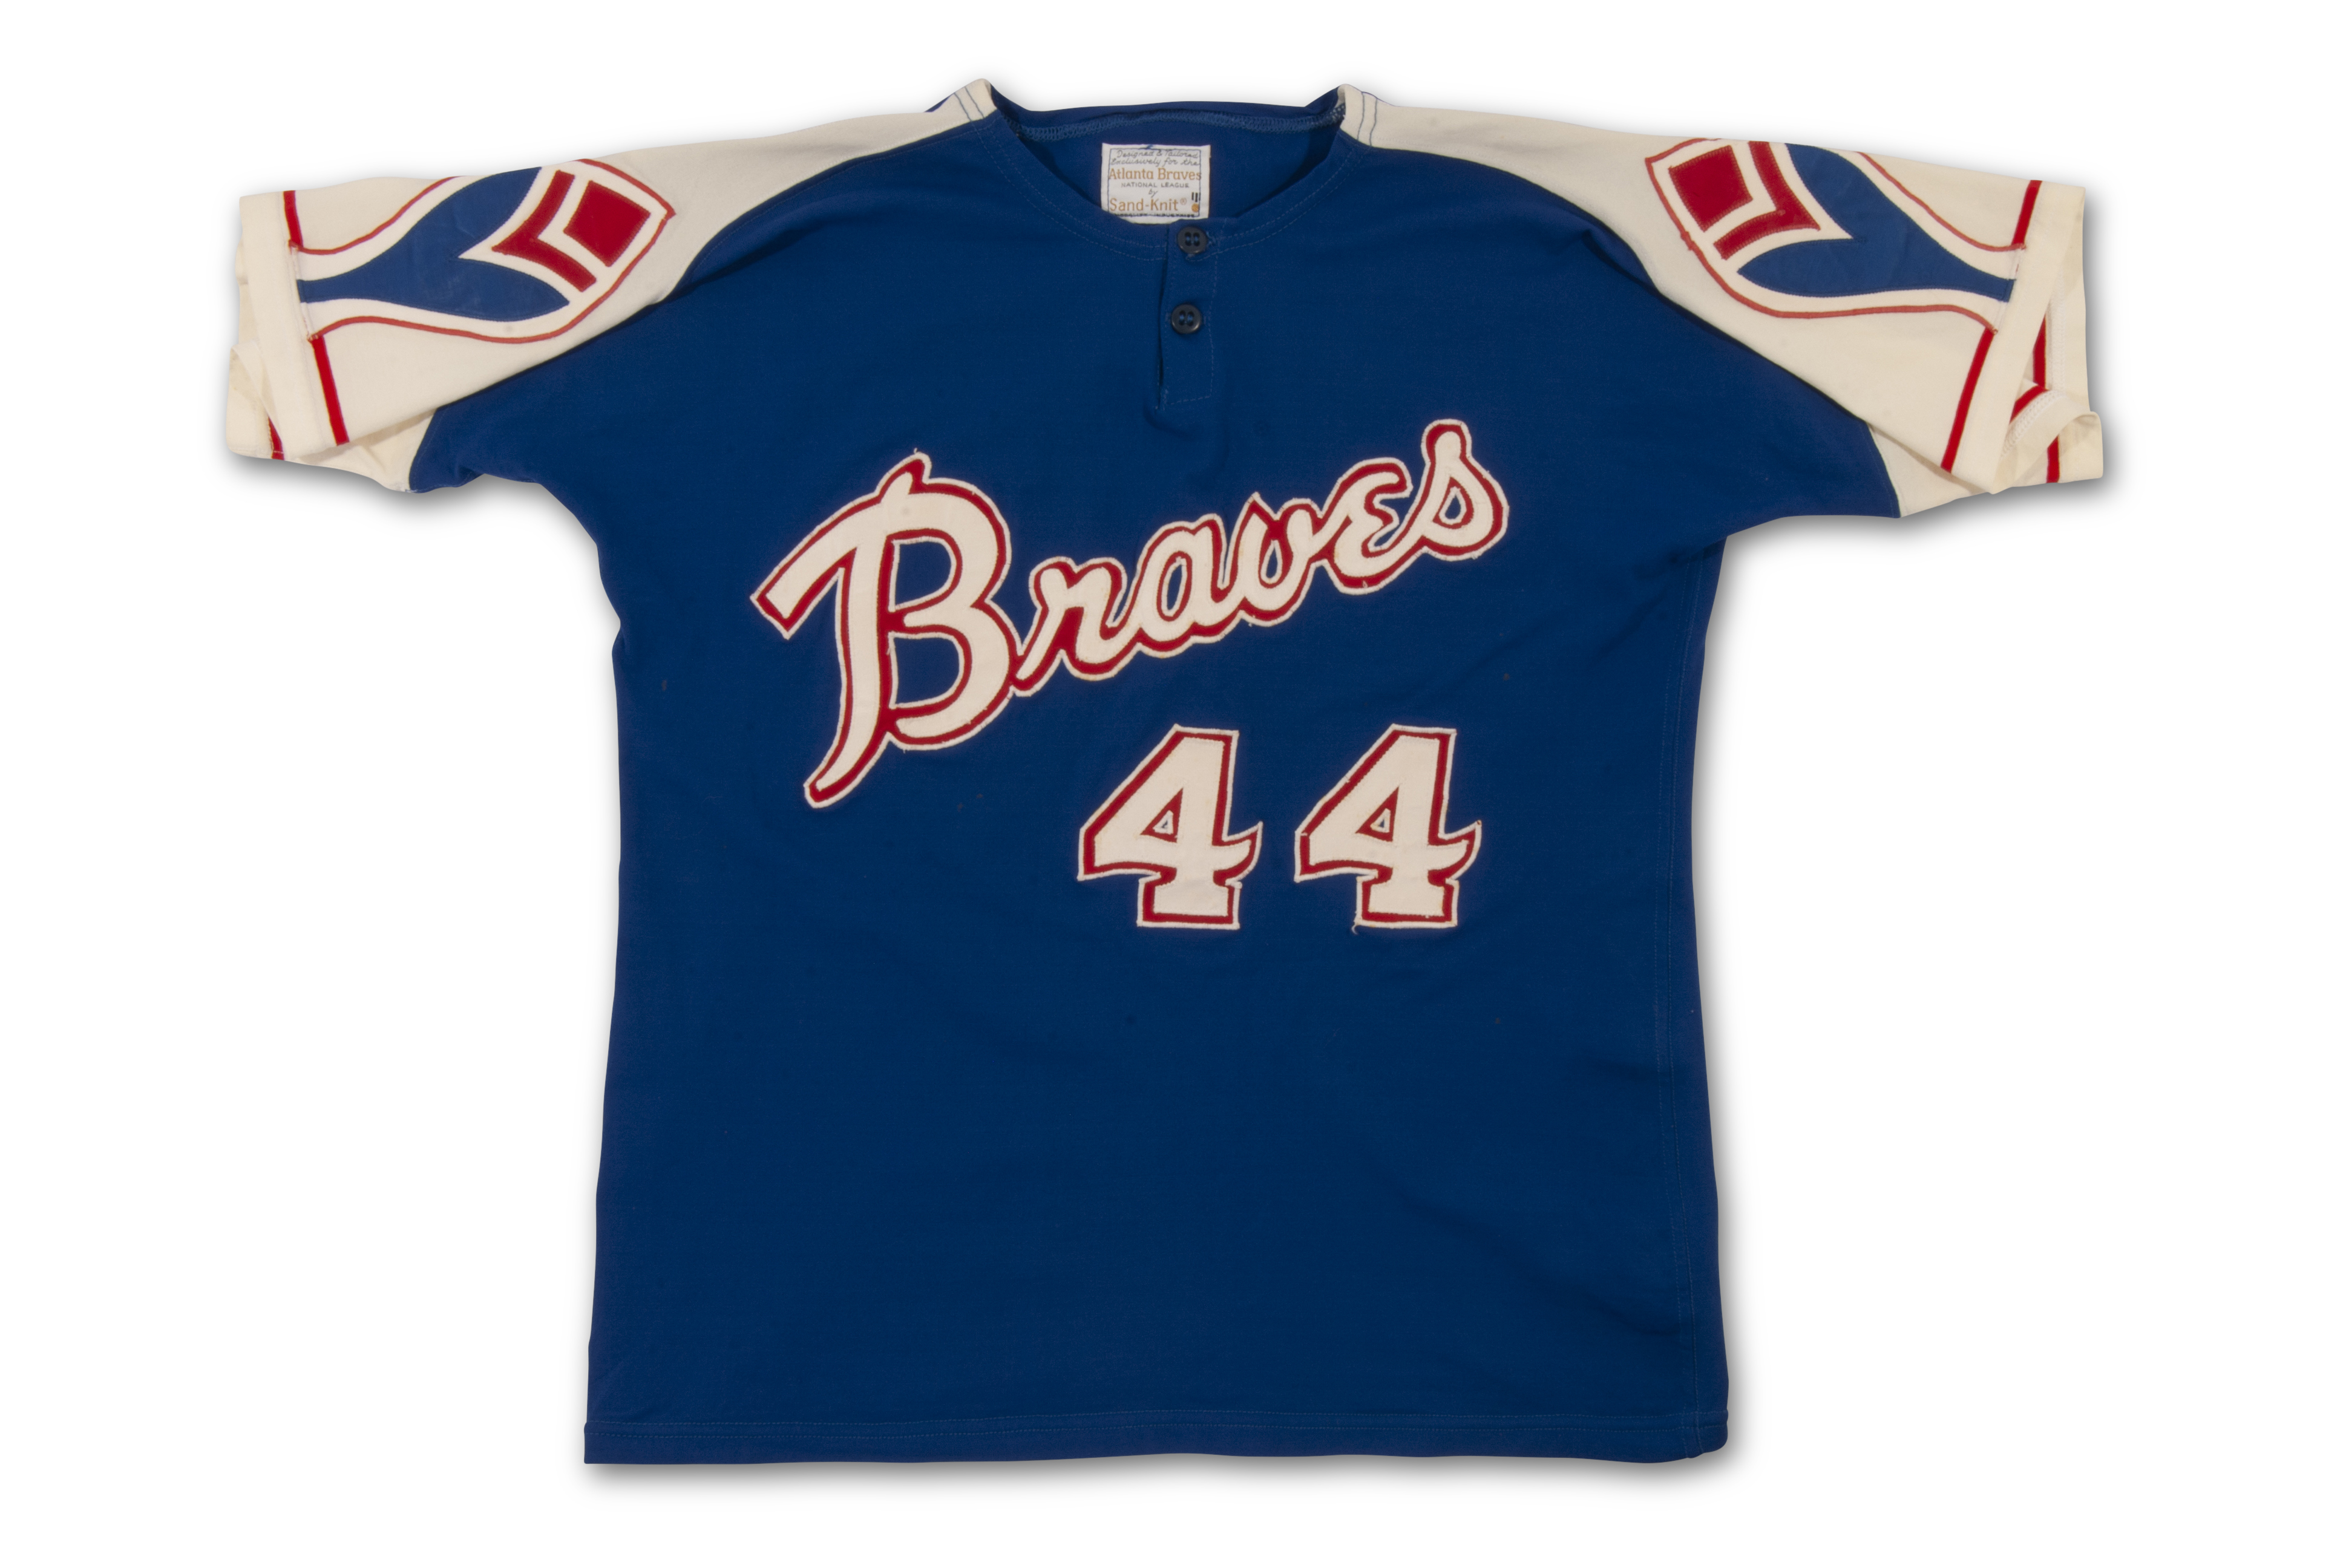 2000's Hank Aaron Signed Jersey. Baseball Collectibles Uniforms